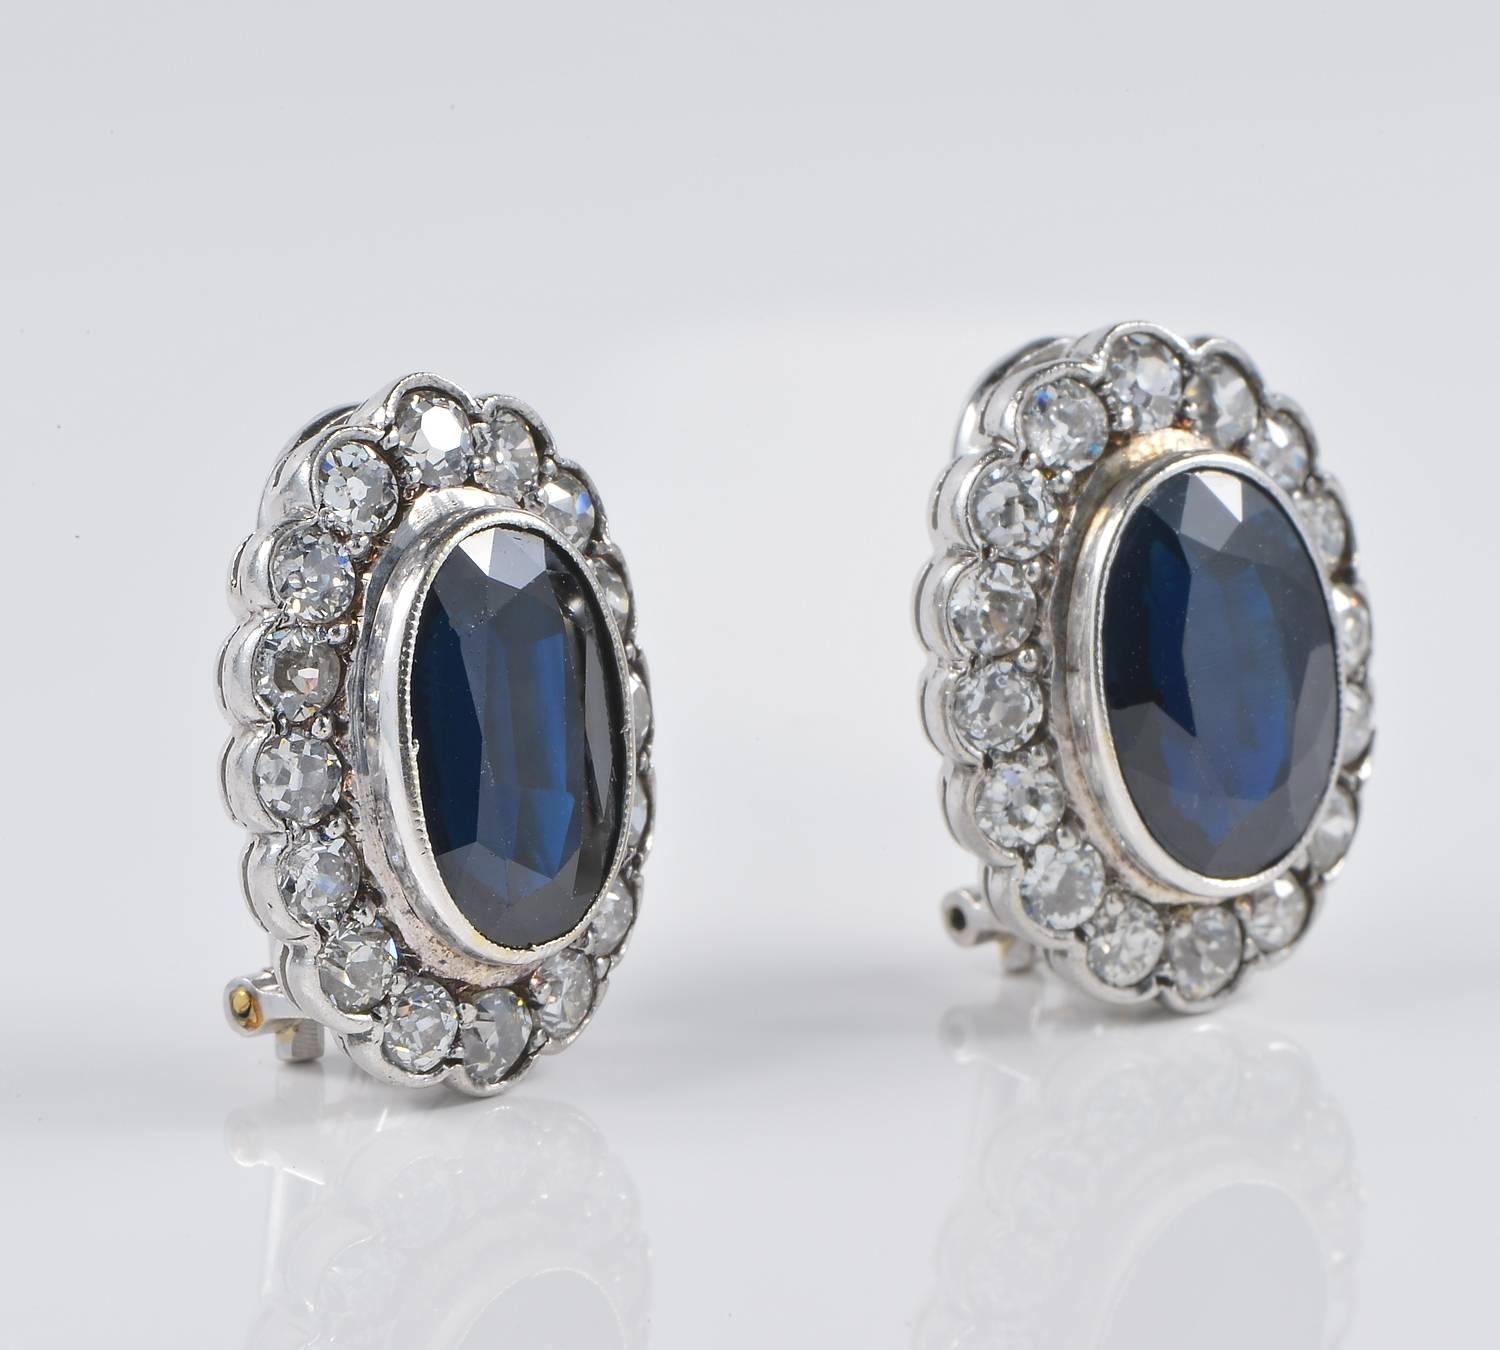 Classy and sophisticate in design, wearable at any occasion.
Vintage, all Platinum crafted by finest workmanship.
Big in presence and effective look.
Boasting two midnight Blue natural no heat or treated Sapphire of 8.40 Ct estimate content for both